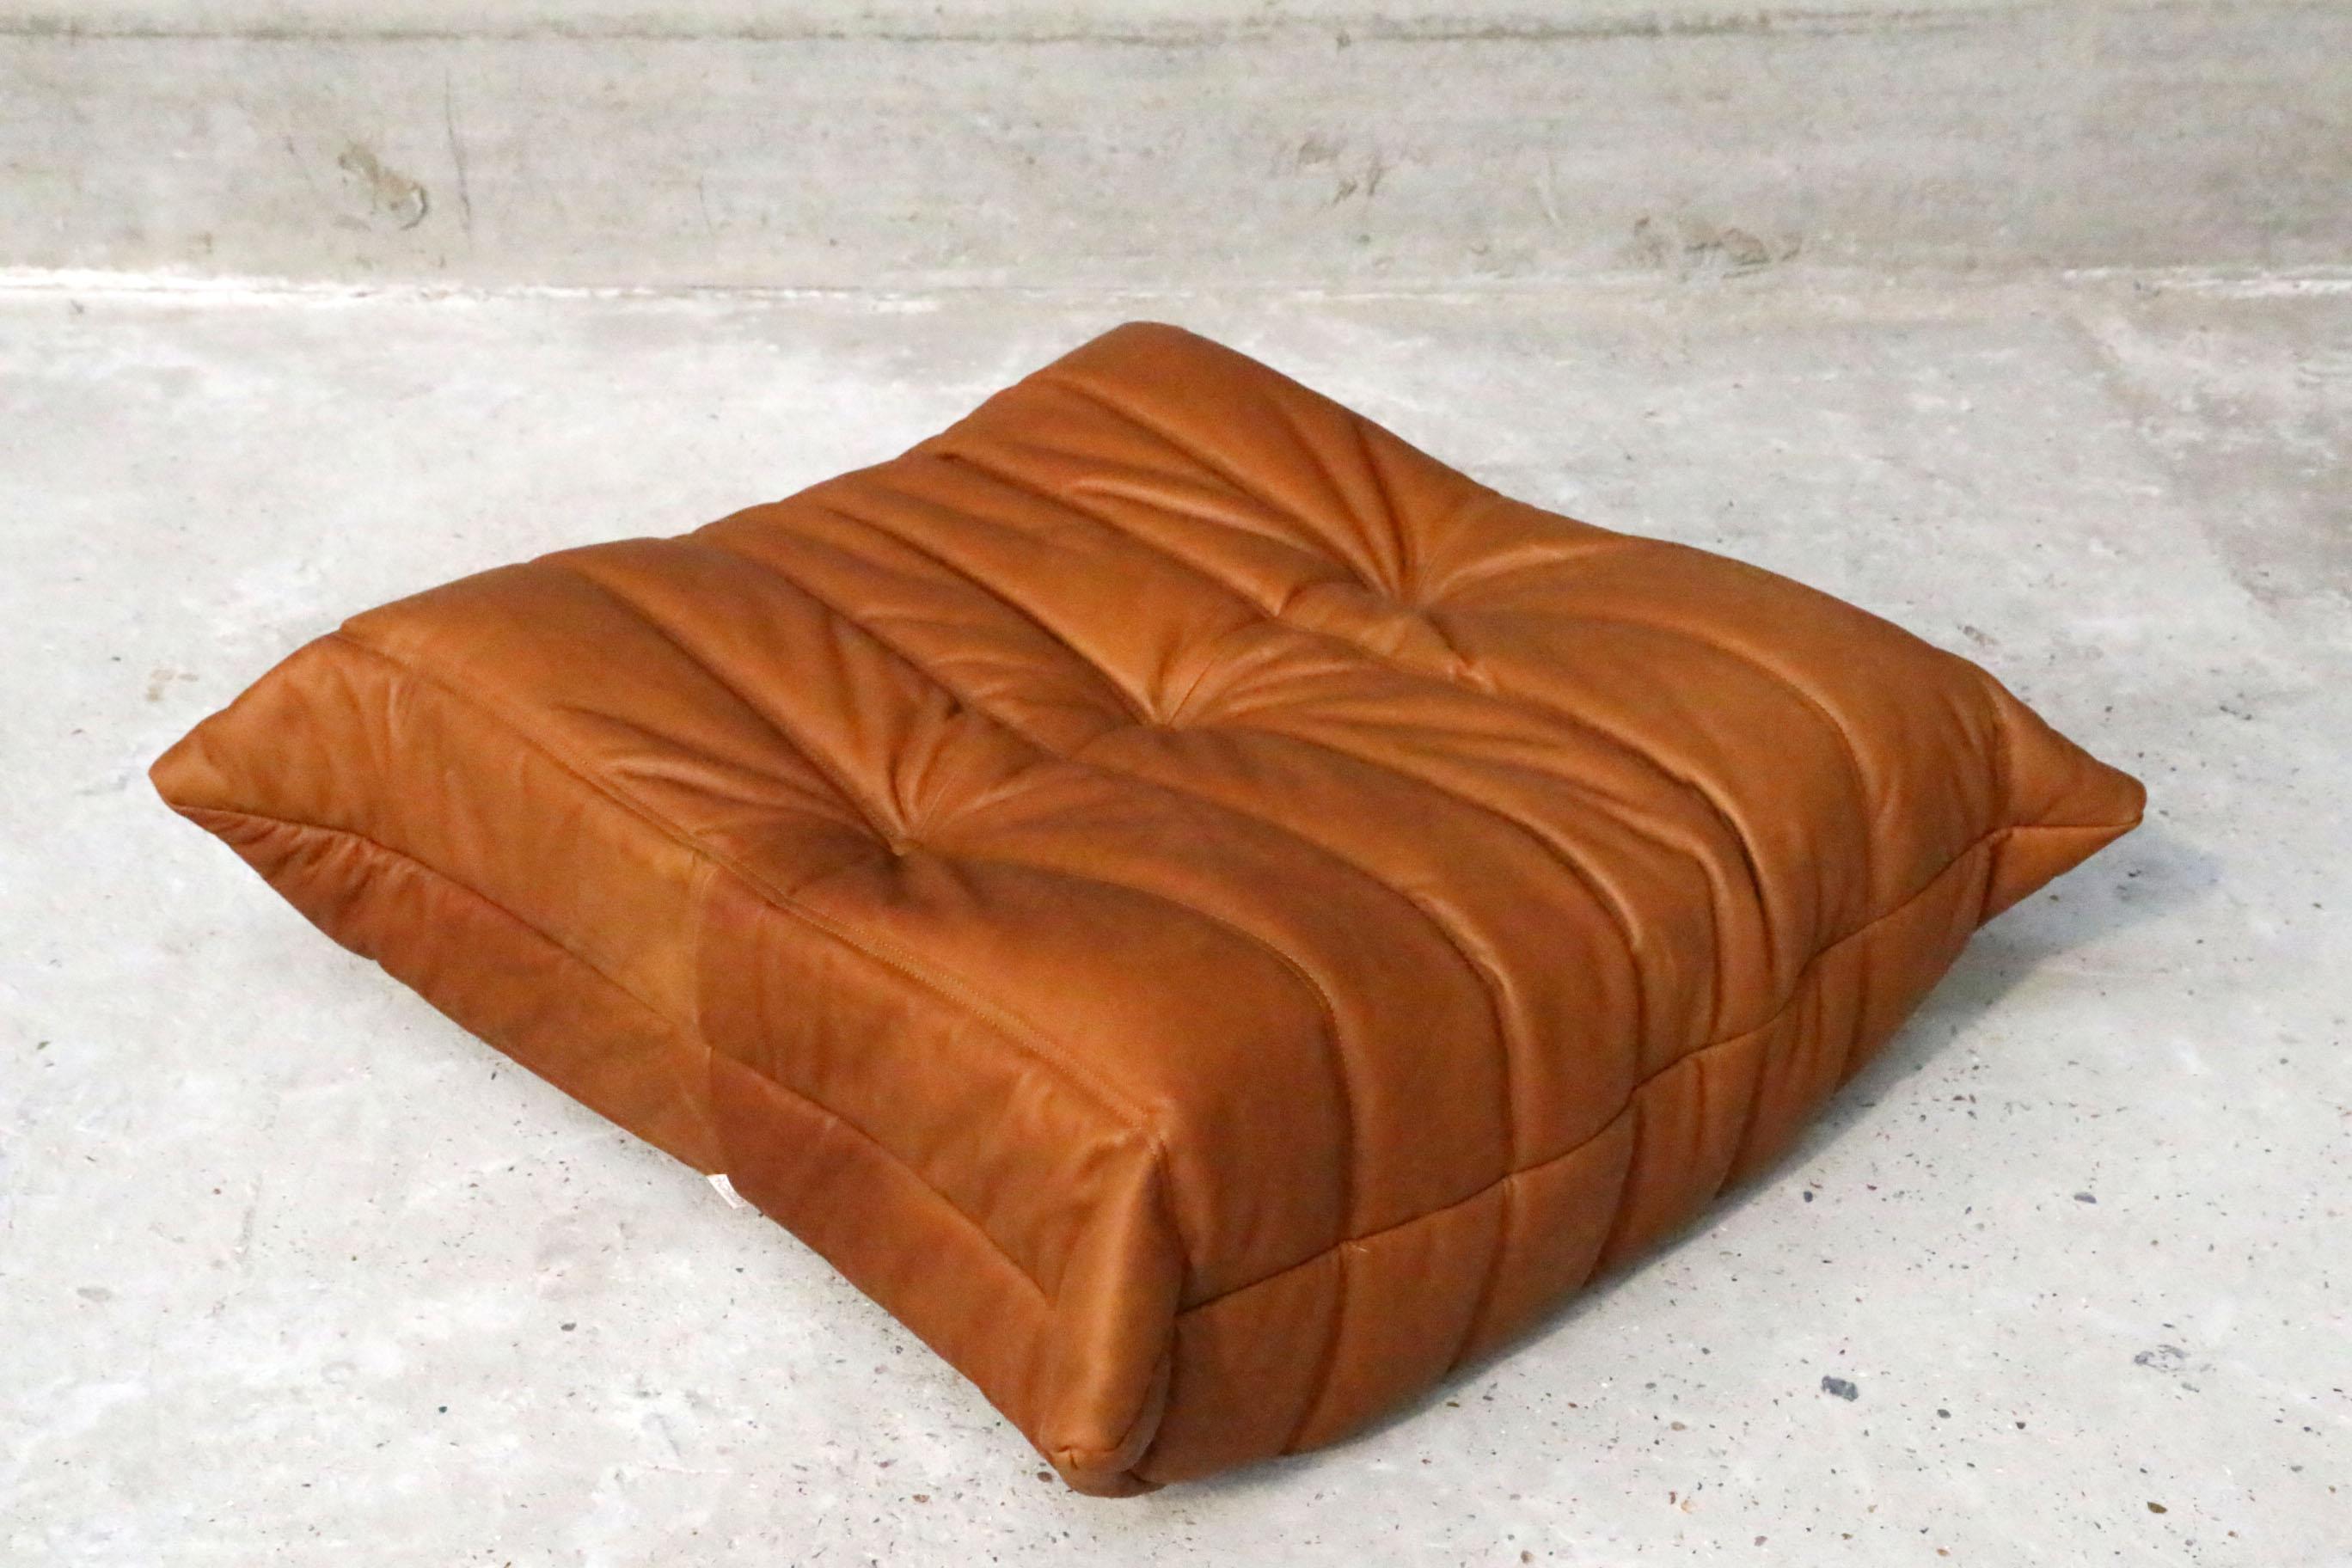 Iconic French vintage pouf, beautifully reupholstered with our signature full grain cognac leather.
Original genuine vintage 